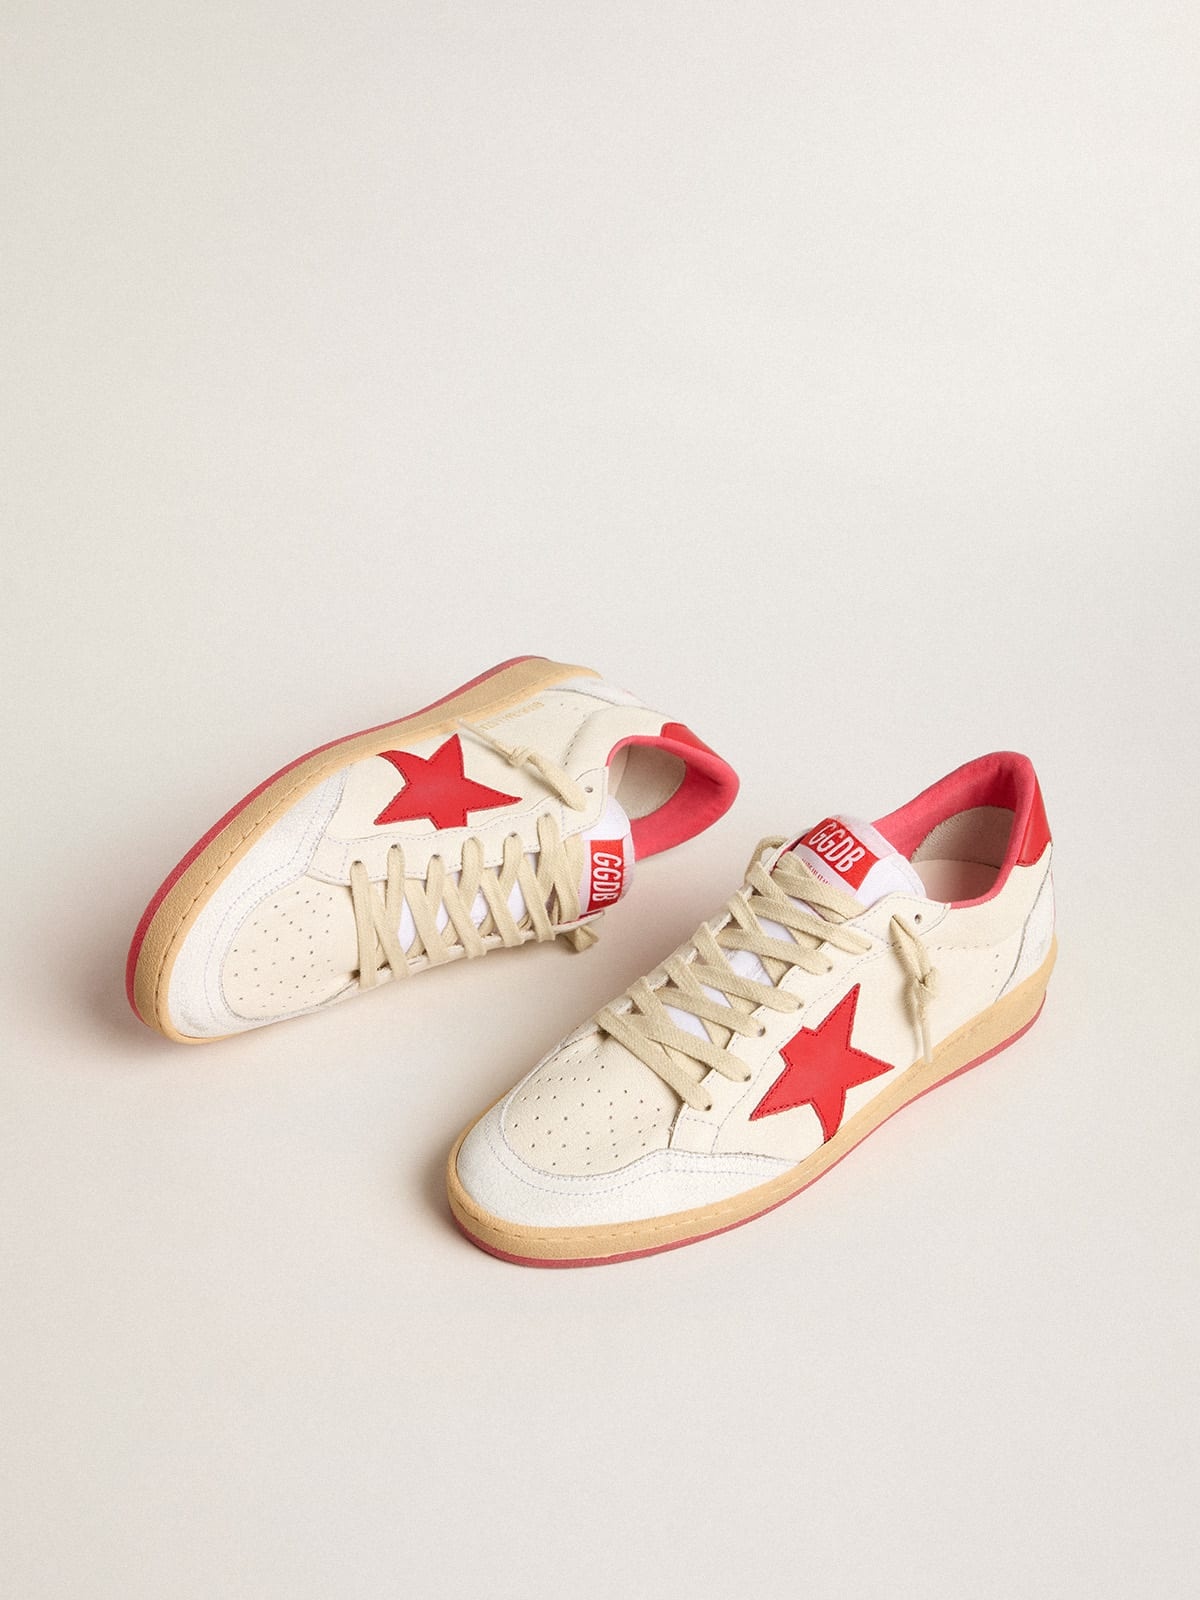 Women’s Ball Star  Wishes in white leather with a red star and heel tab - 3